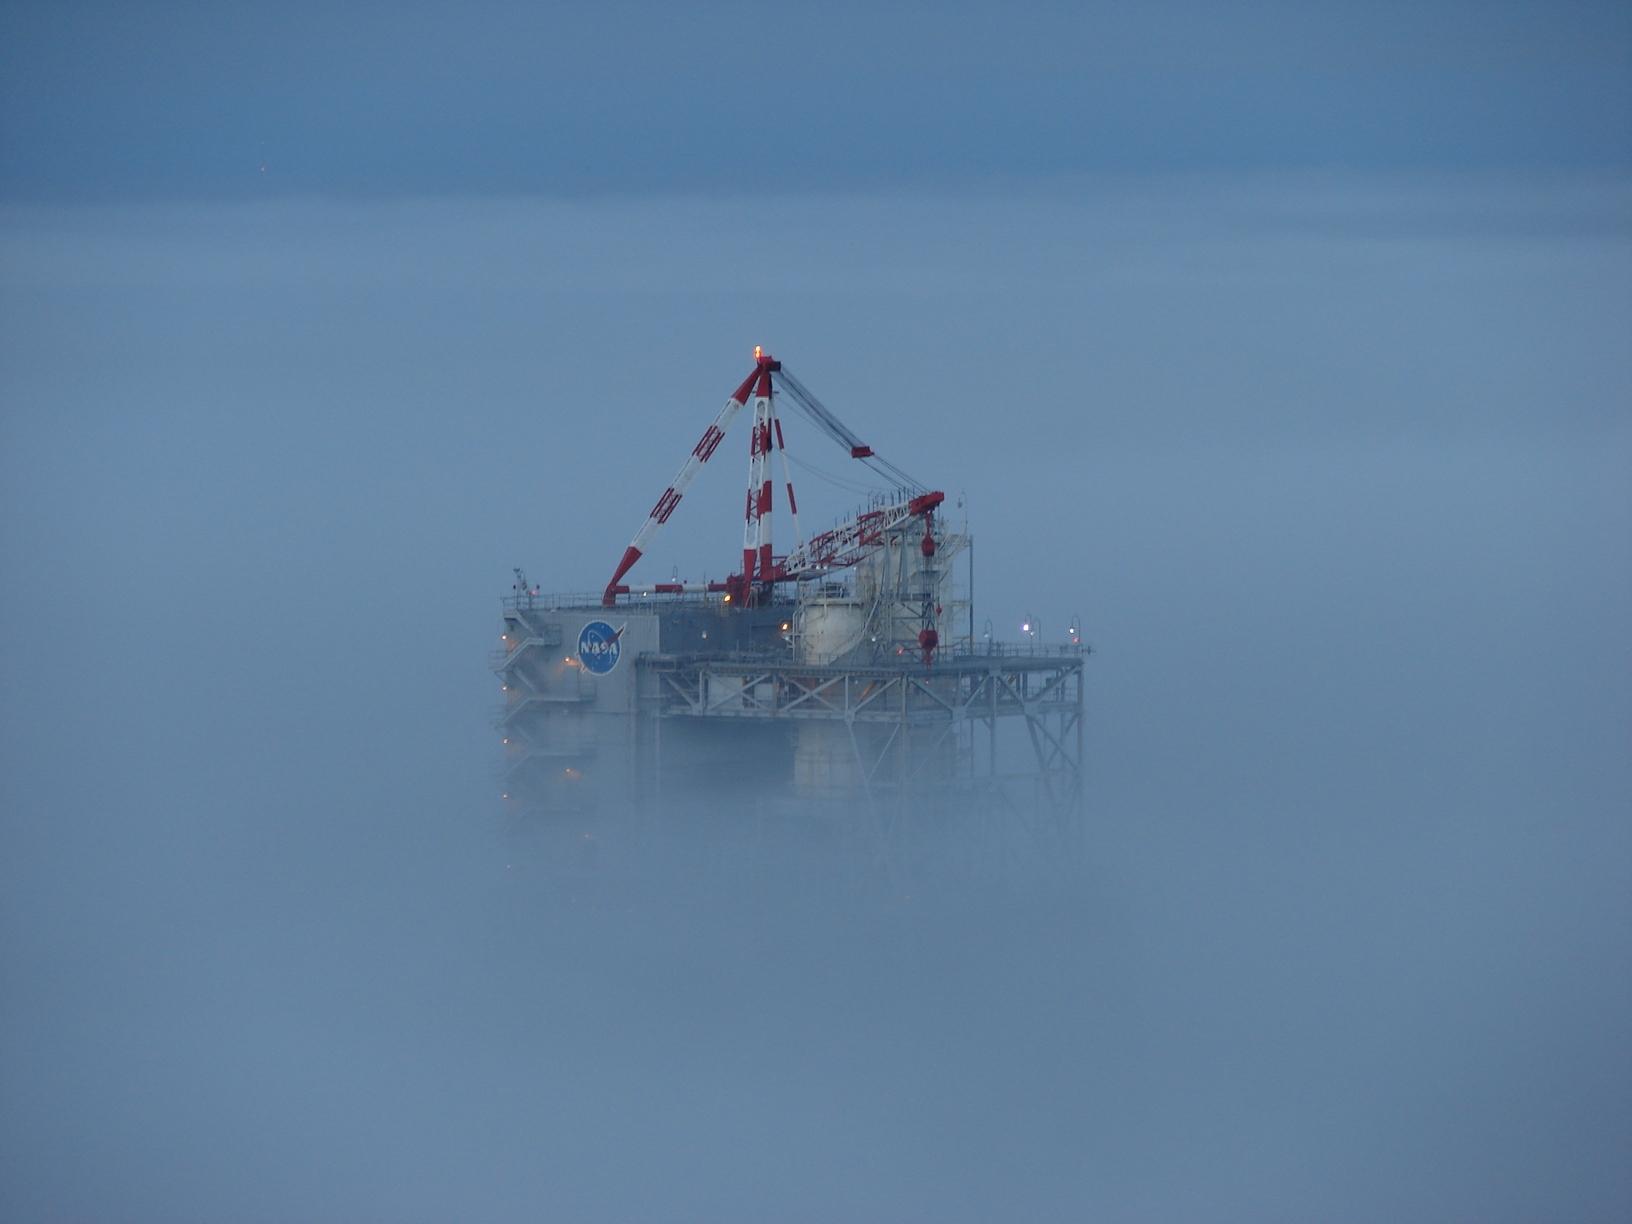 Test Stand A-2 Peering Out from the Fog